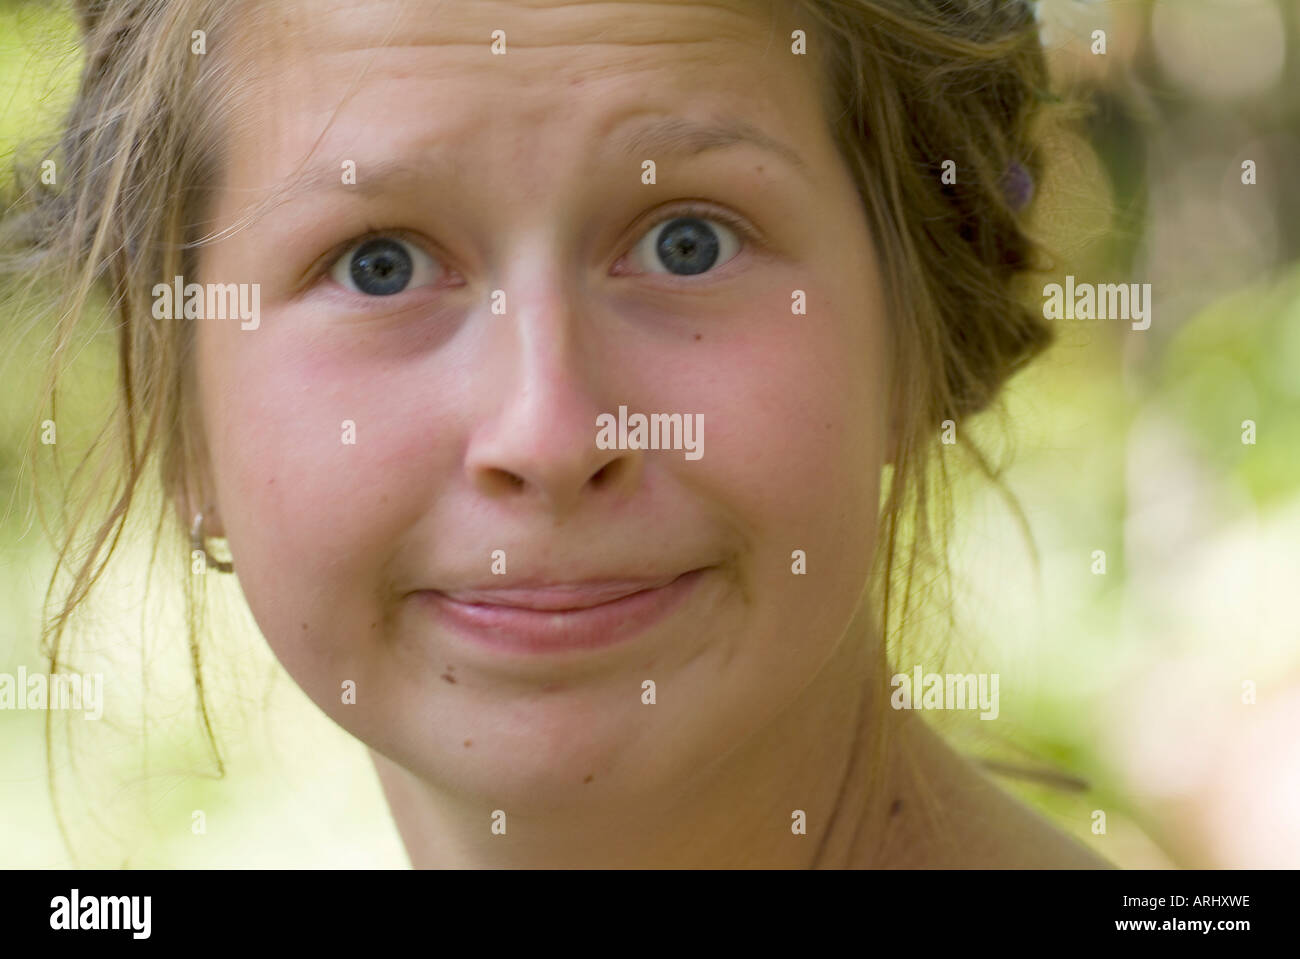 portrait of a young woman girl with helpless astonished suprised upset facial expression Stock Photo